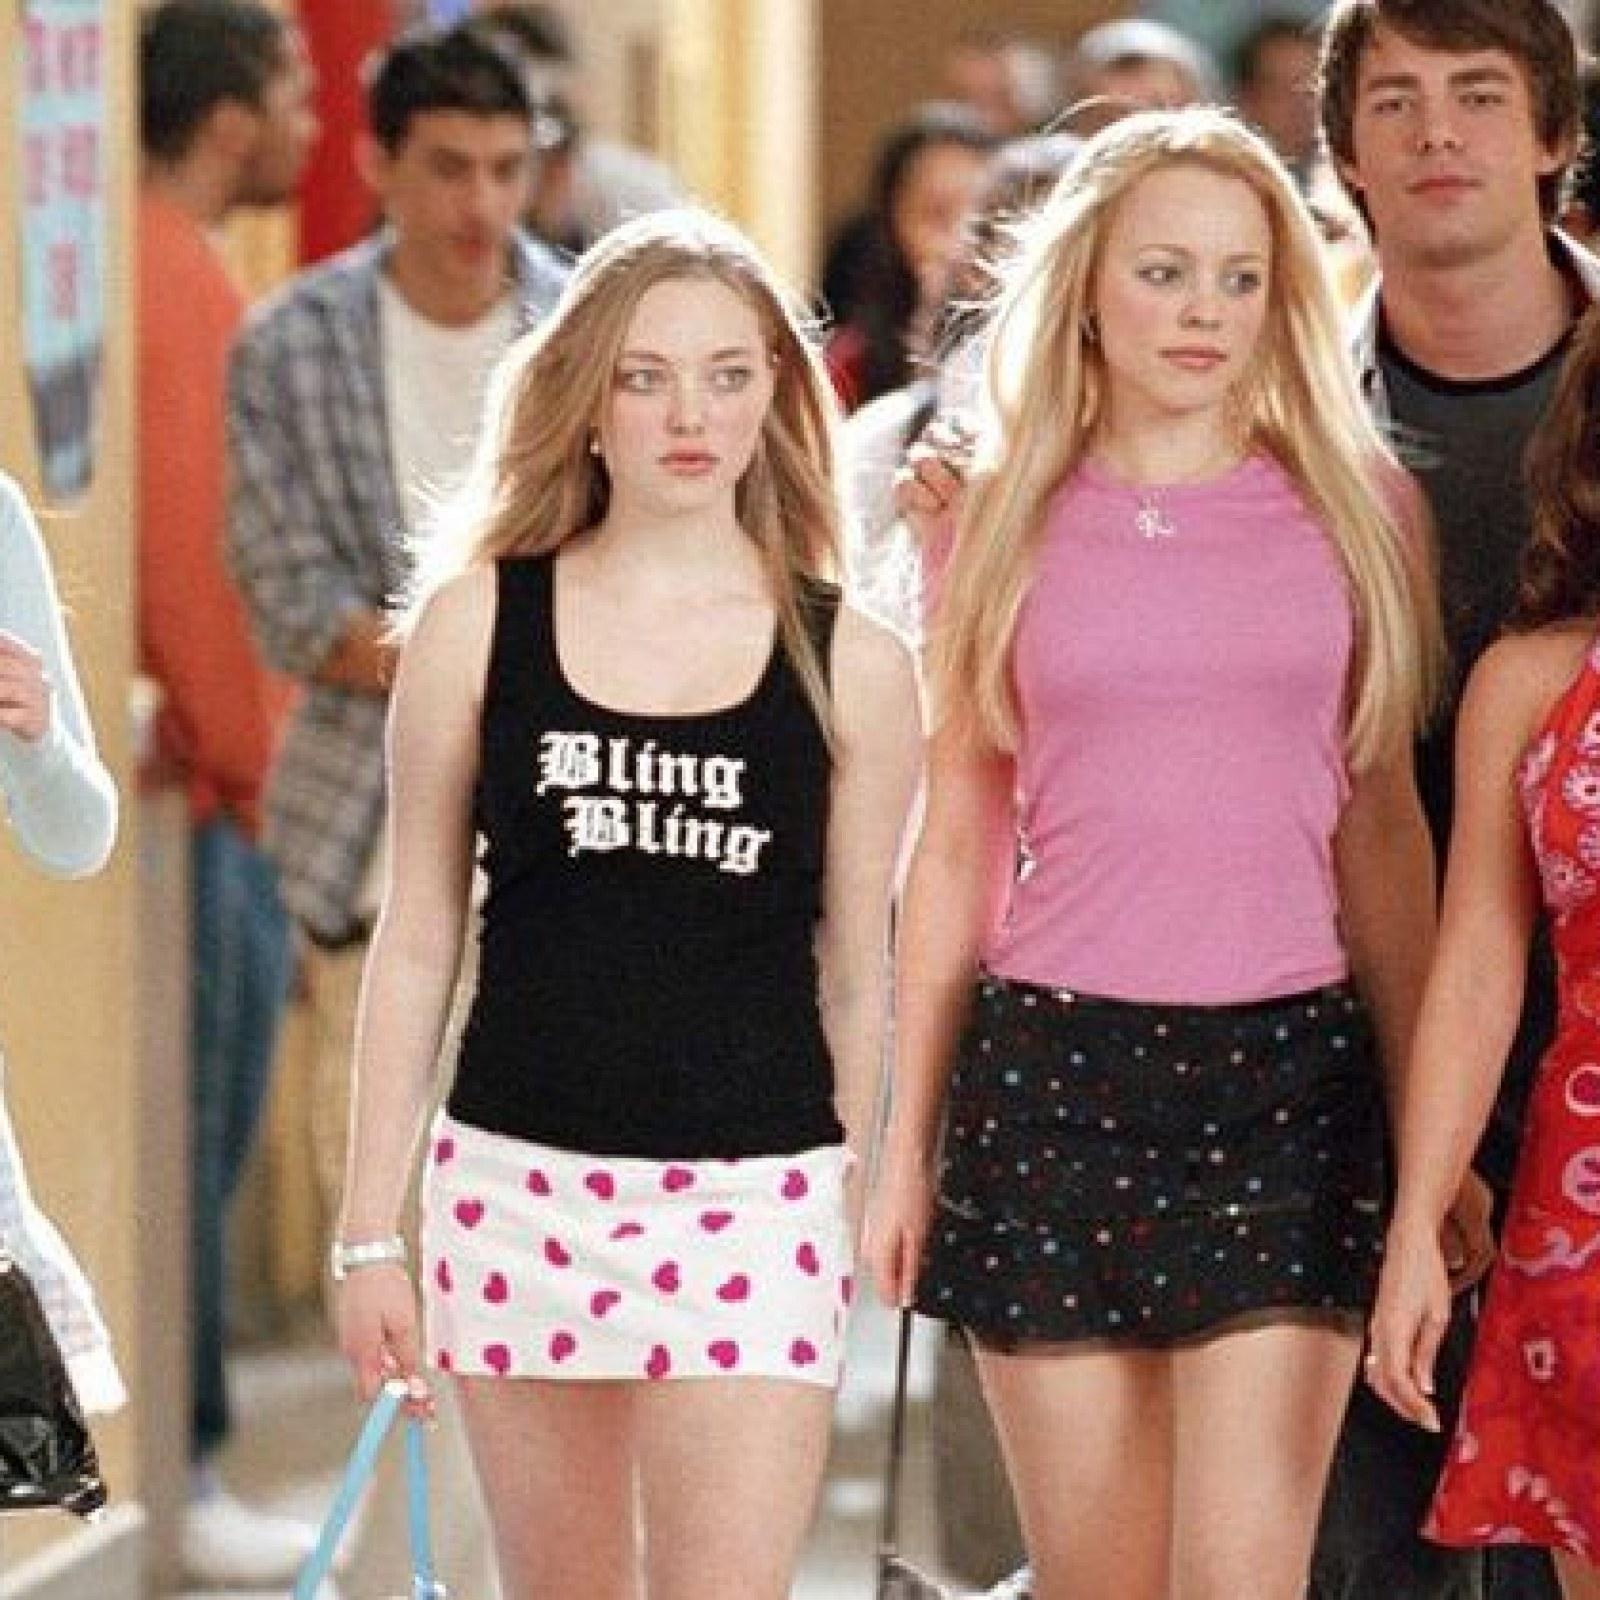 Mean Girls' Broadway Musical: How to Get Tickets